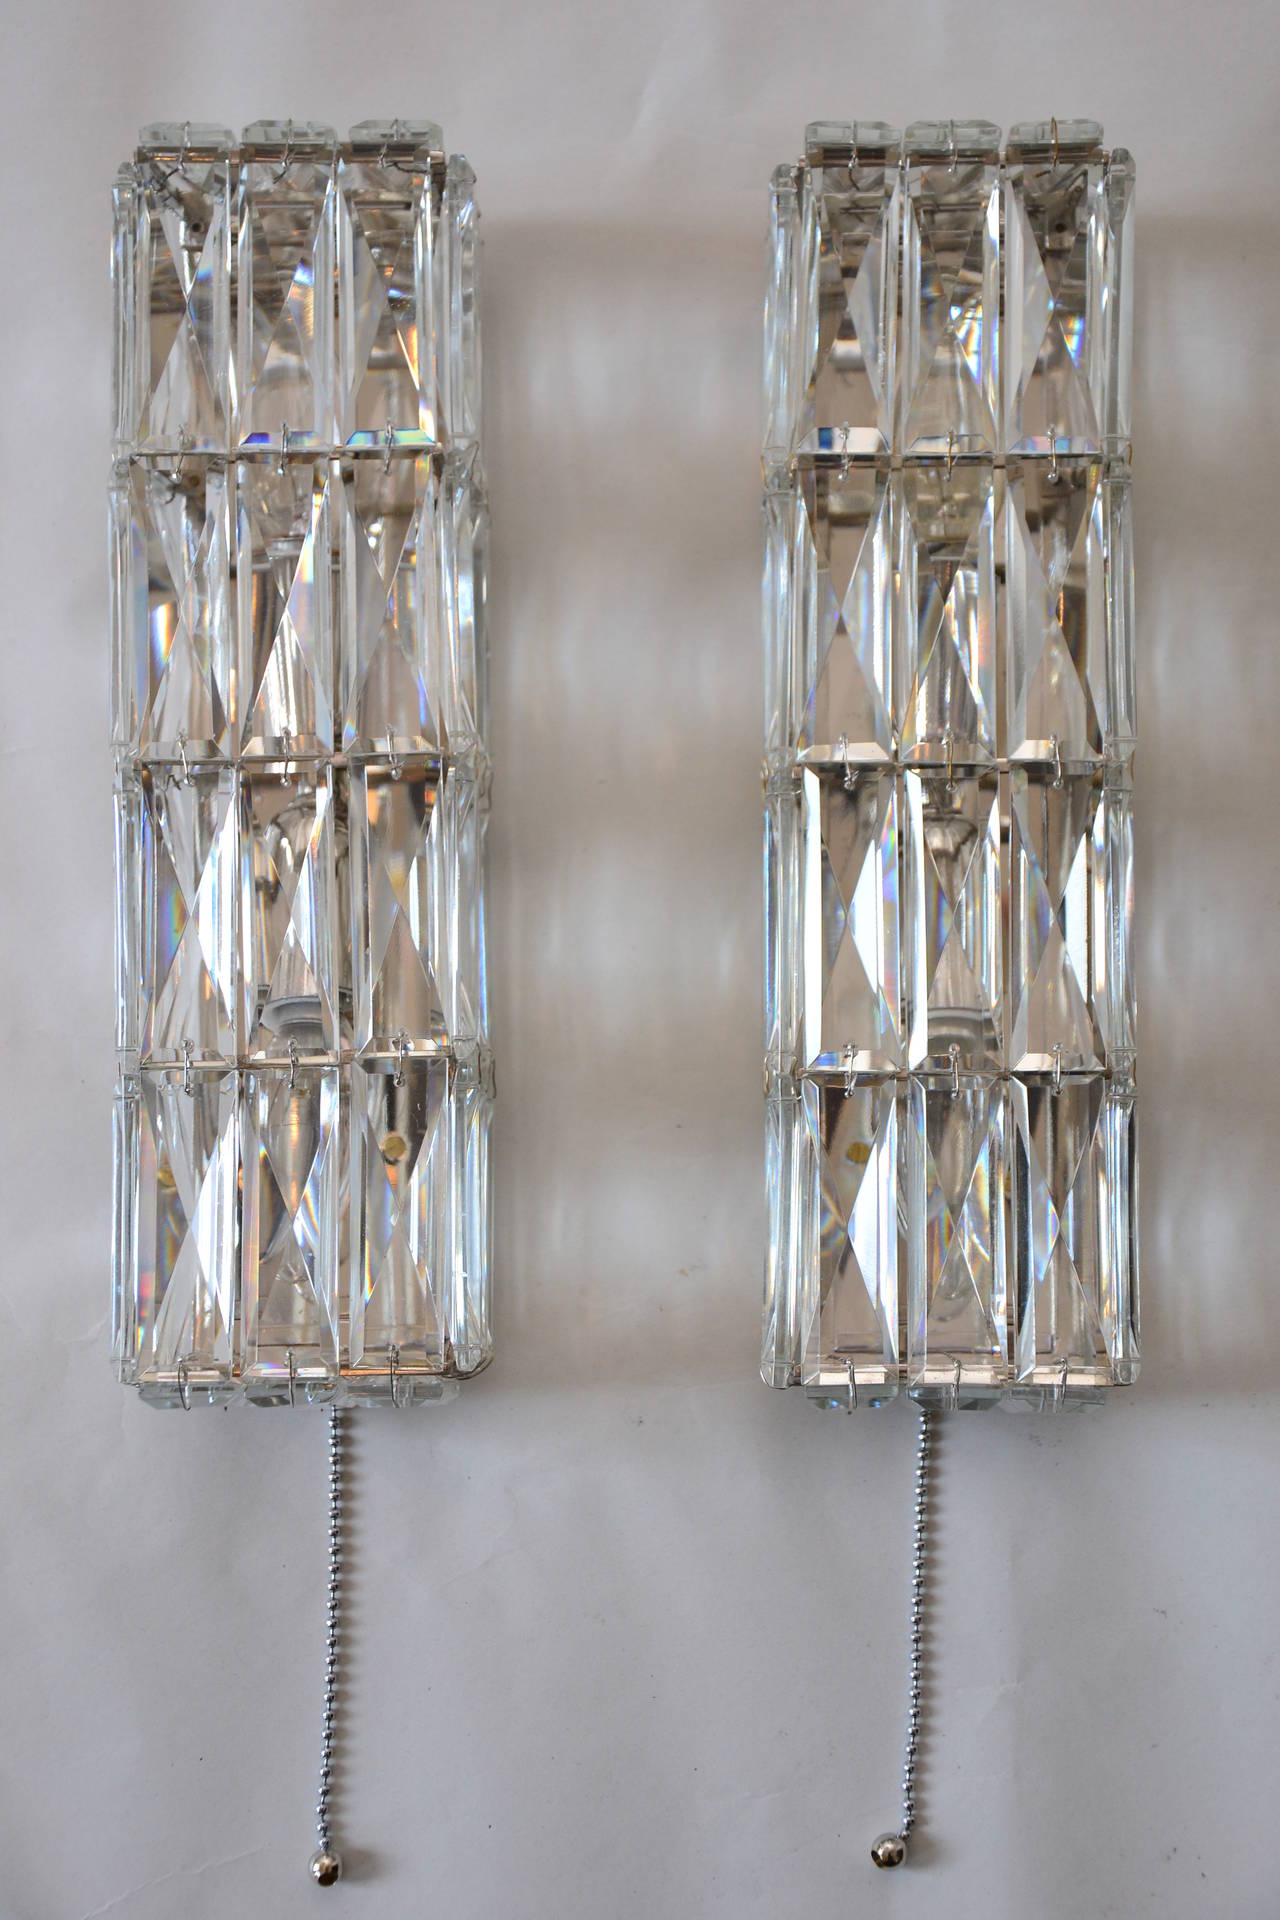 Two nickel-plated crystal glass wall lamp, manufacture Bakalowits, Vienna, 1950. Handmade, covered with beautiful square faceted crystals,
Original condition.